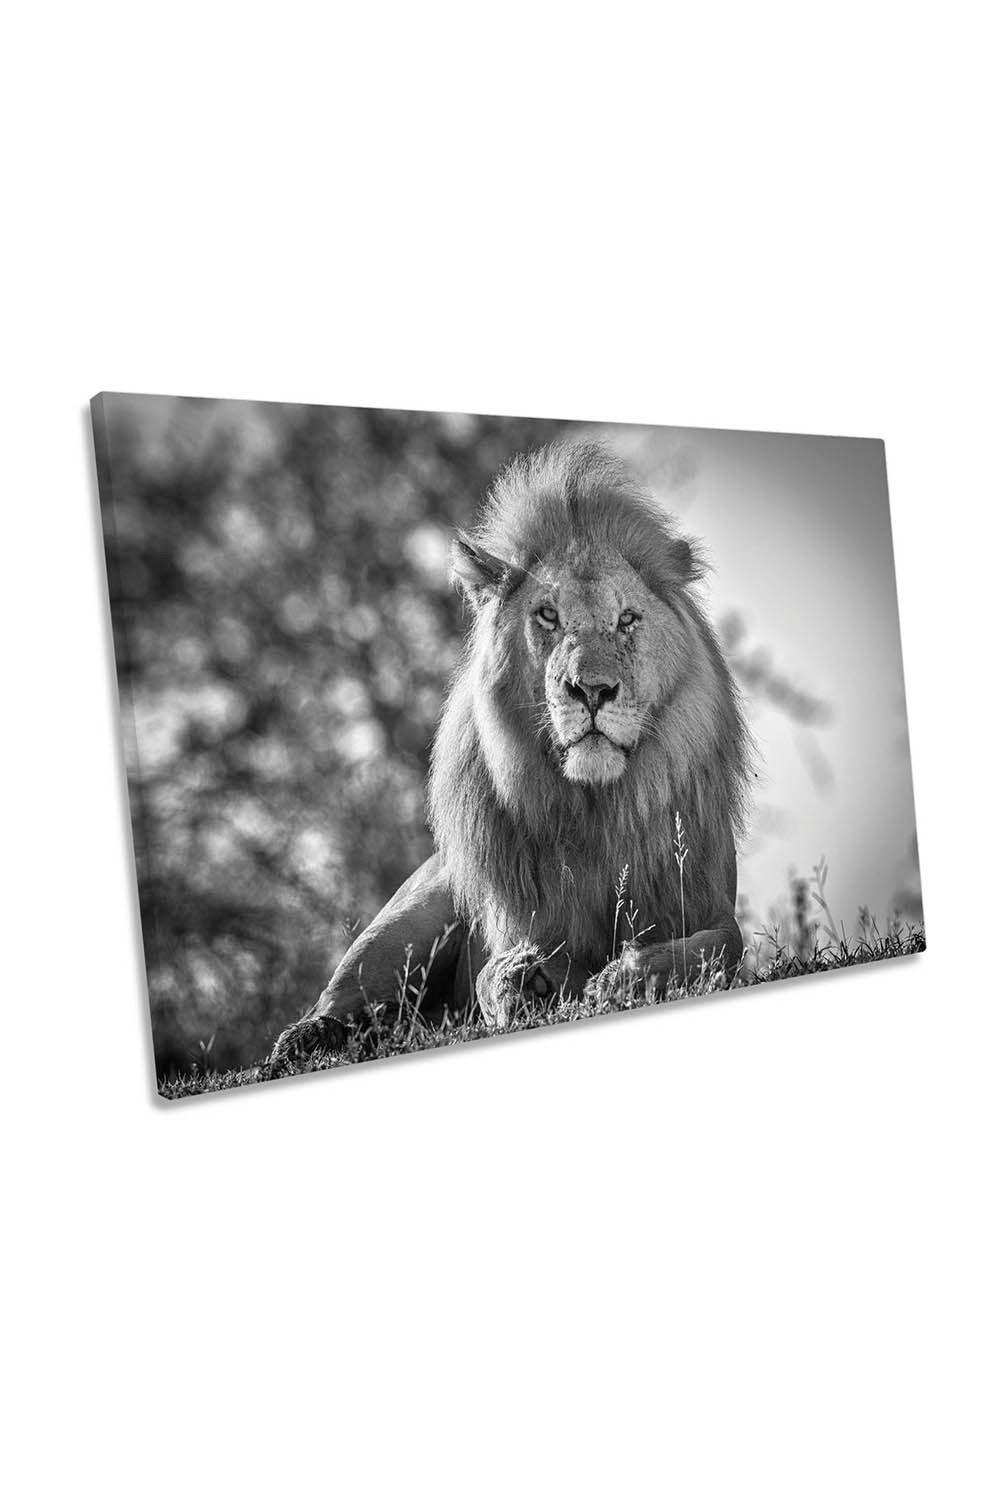 Monochromatic Lion King Wildlife Canvas Wall Art Picture Print